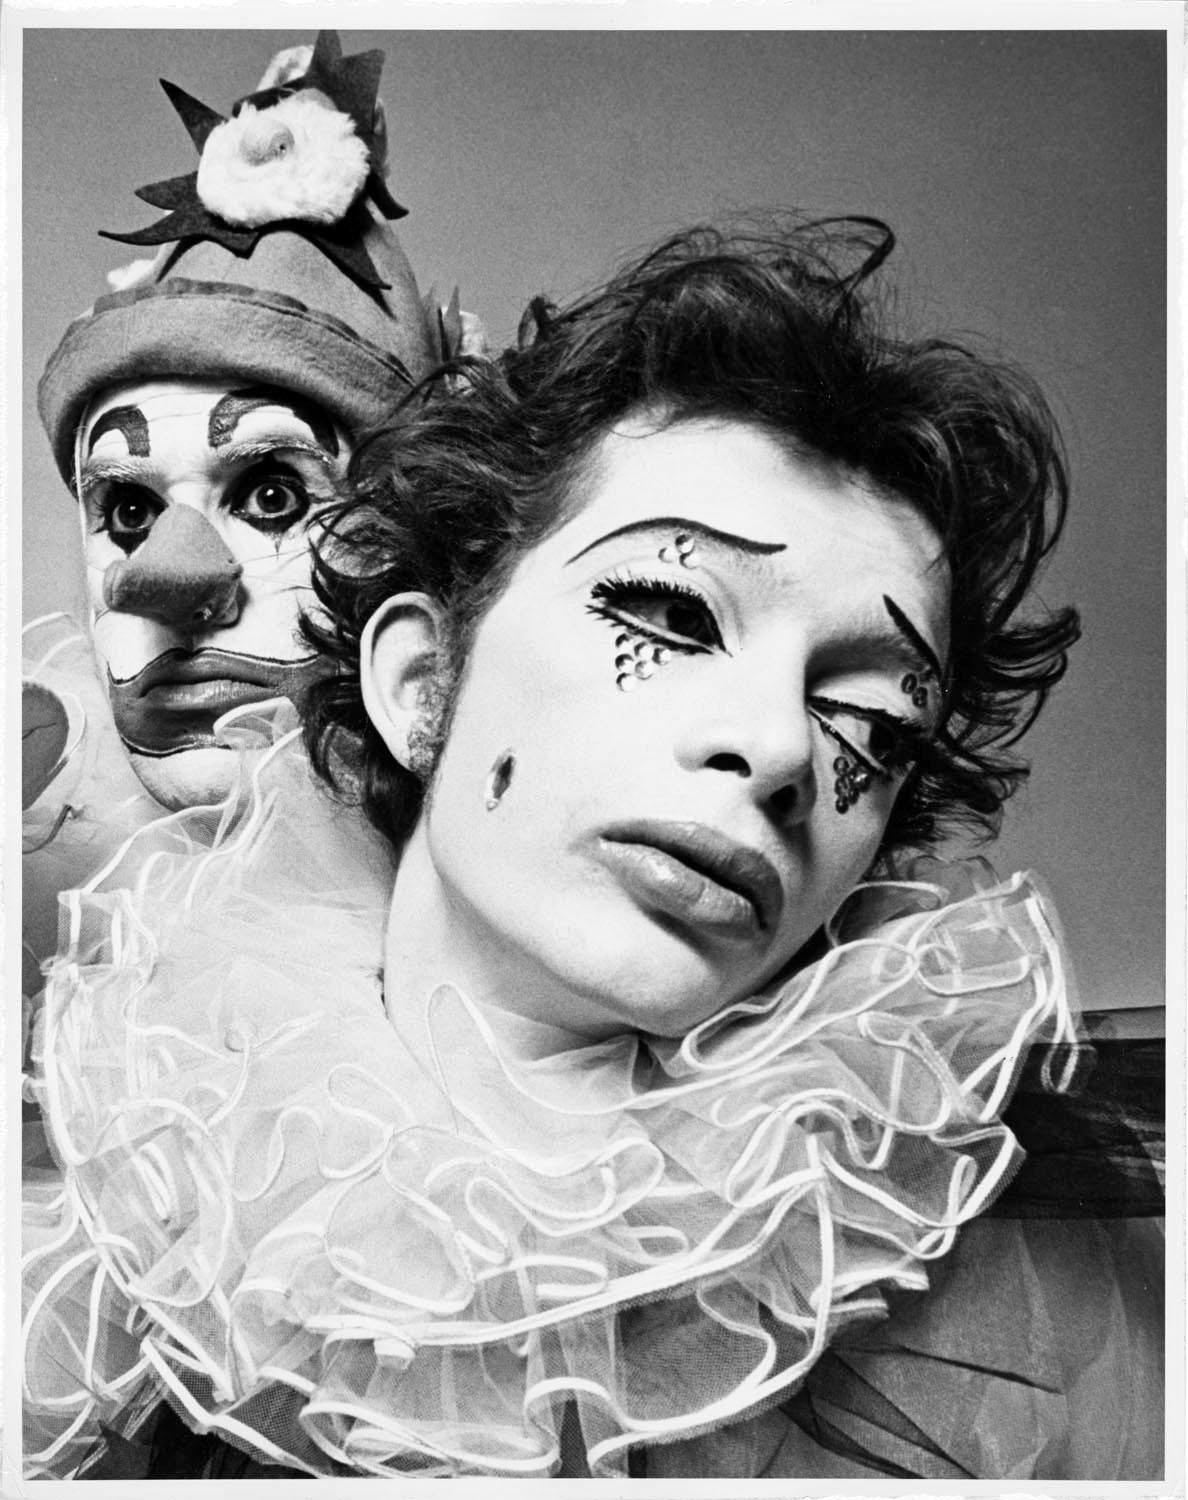 Jack Mitchell Black and White Photograph - Joffrey Ballet dancers in costume for 'The Clowns'